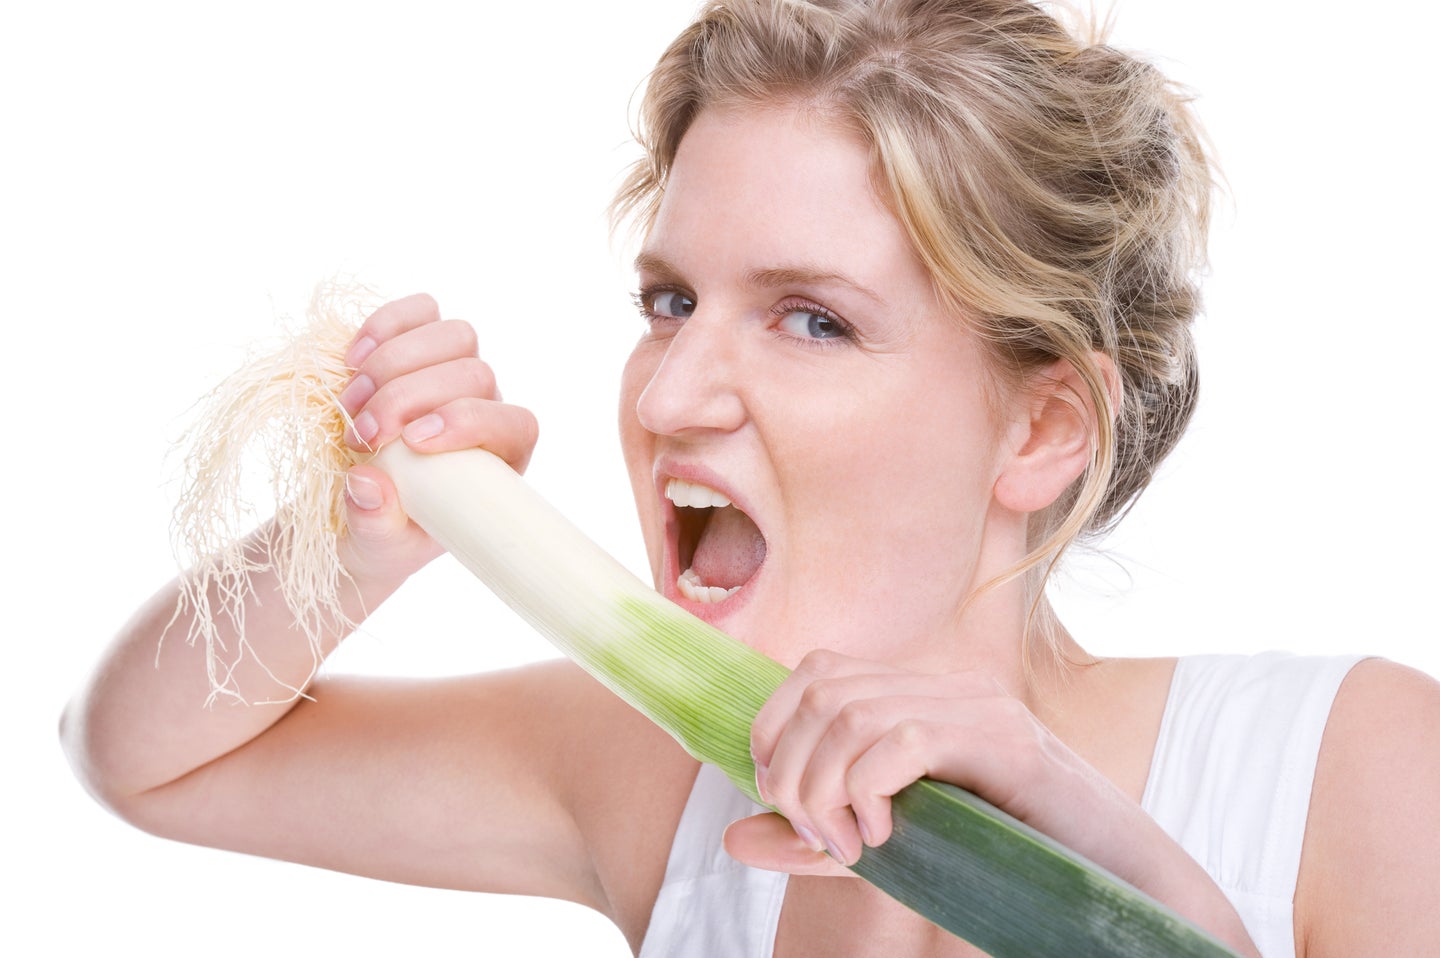 a woman is about to bite into a giant leek, for some reason